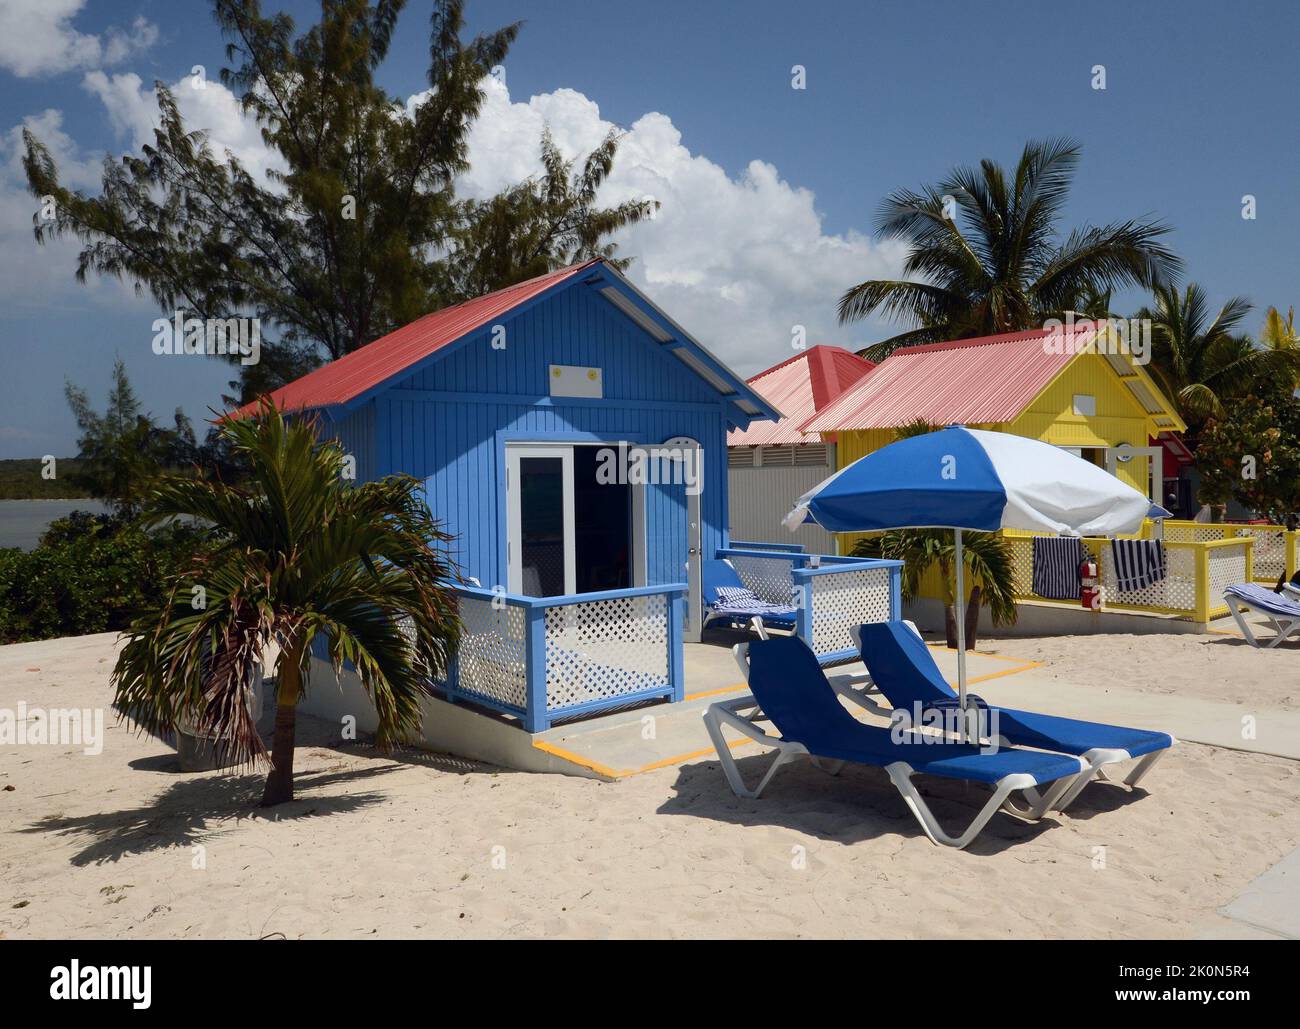 Colorful beach bungalows on a tropical island of the Bahamas Stock Photo